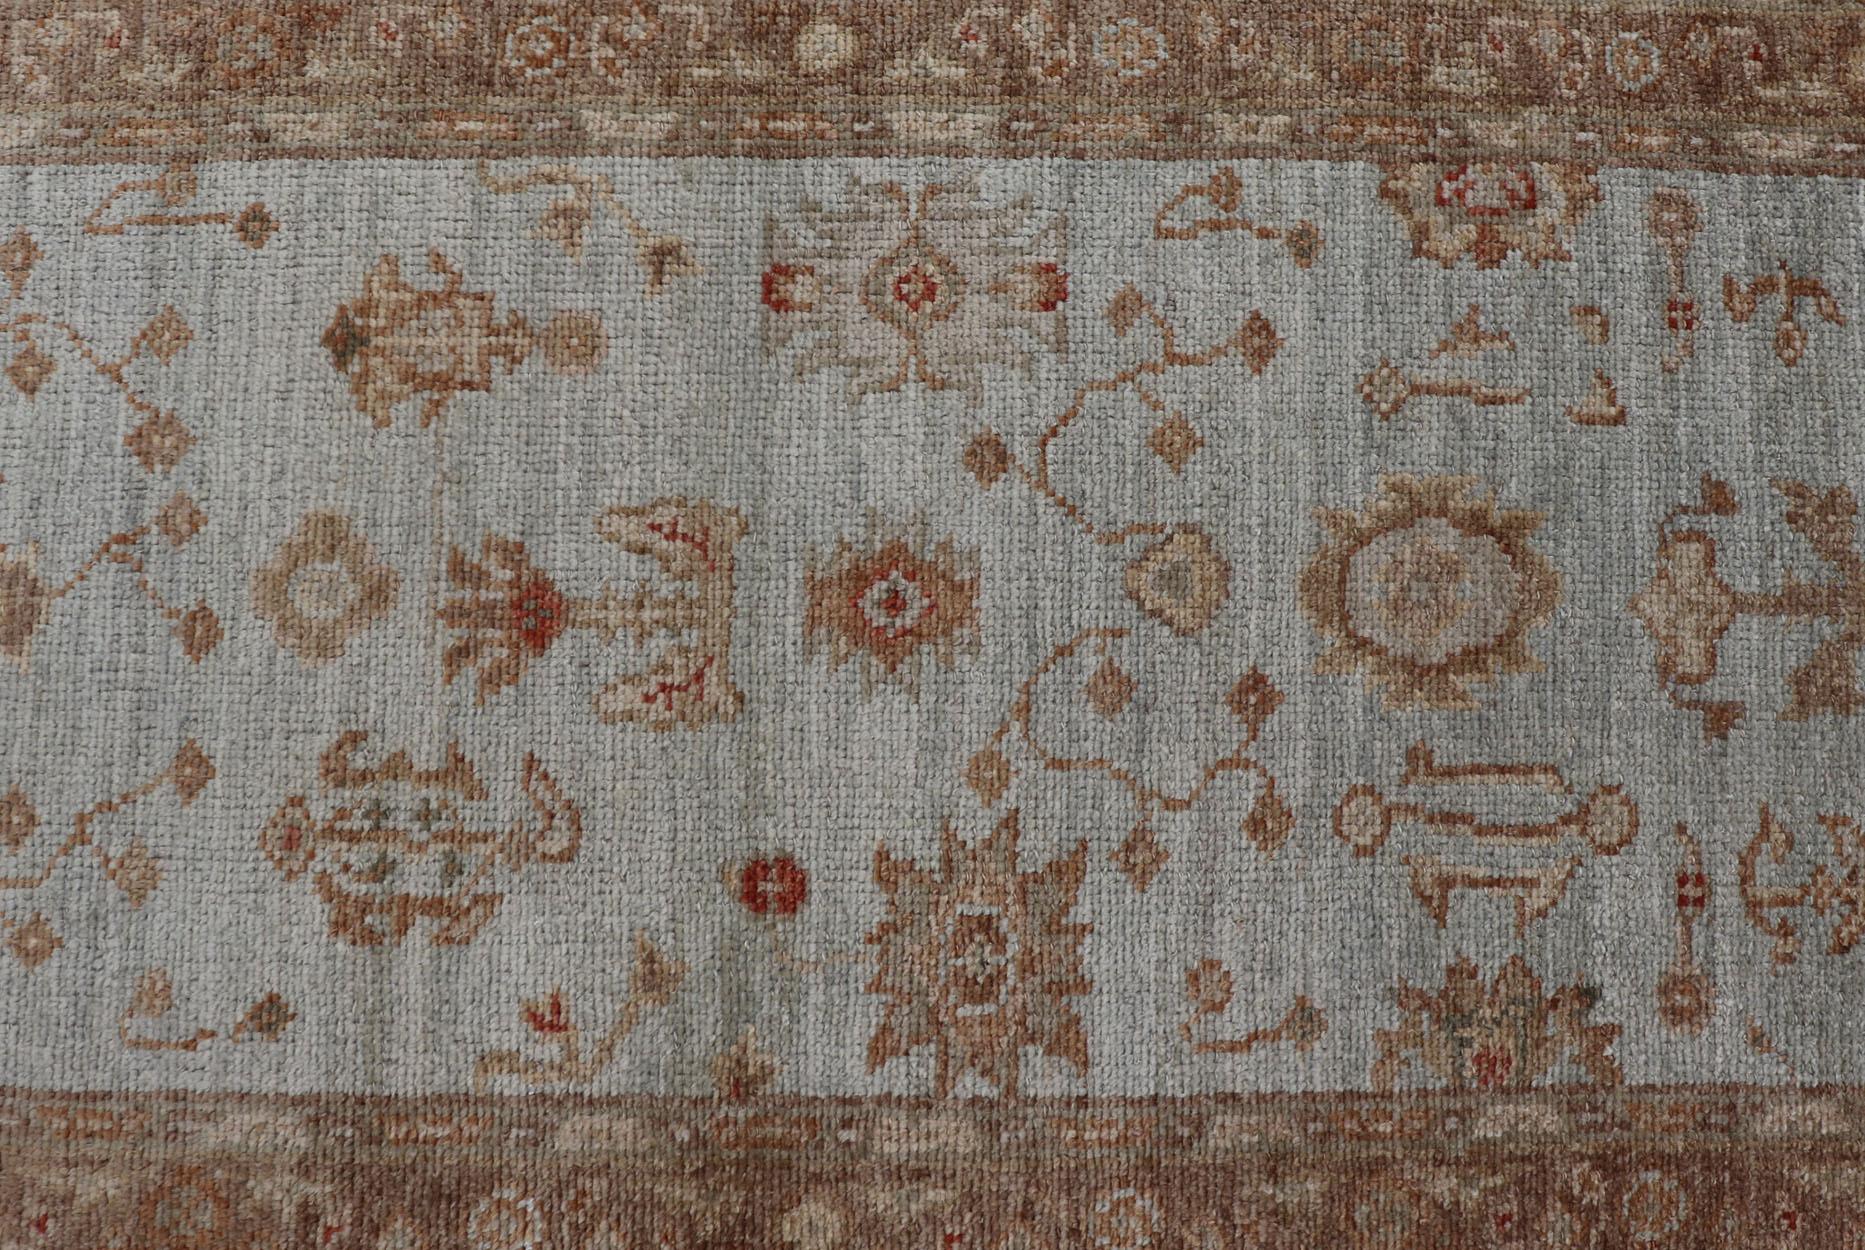 Turkish Oushak Runner with Angora Wool in Sky Blue, Brown and Red In Excellent Condition For Sale In Atlanta, GA